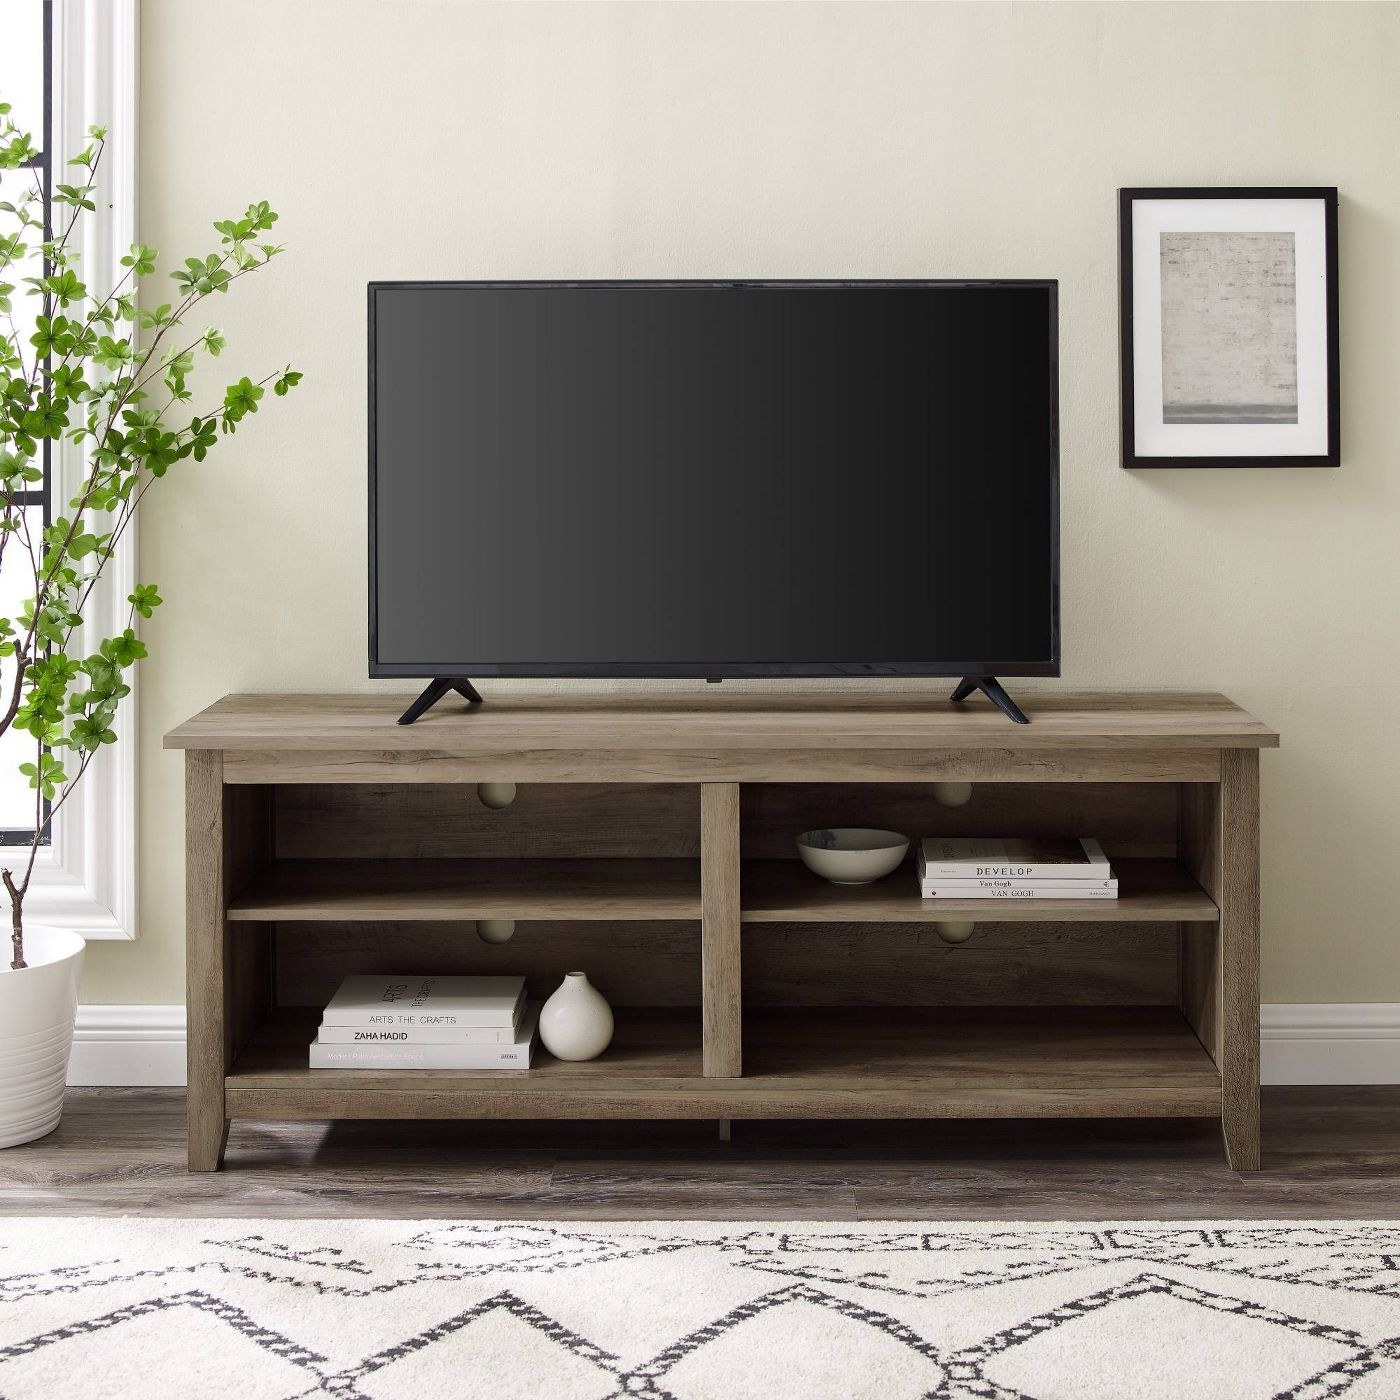 A rustic woof TV stand in a living room 